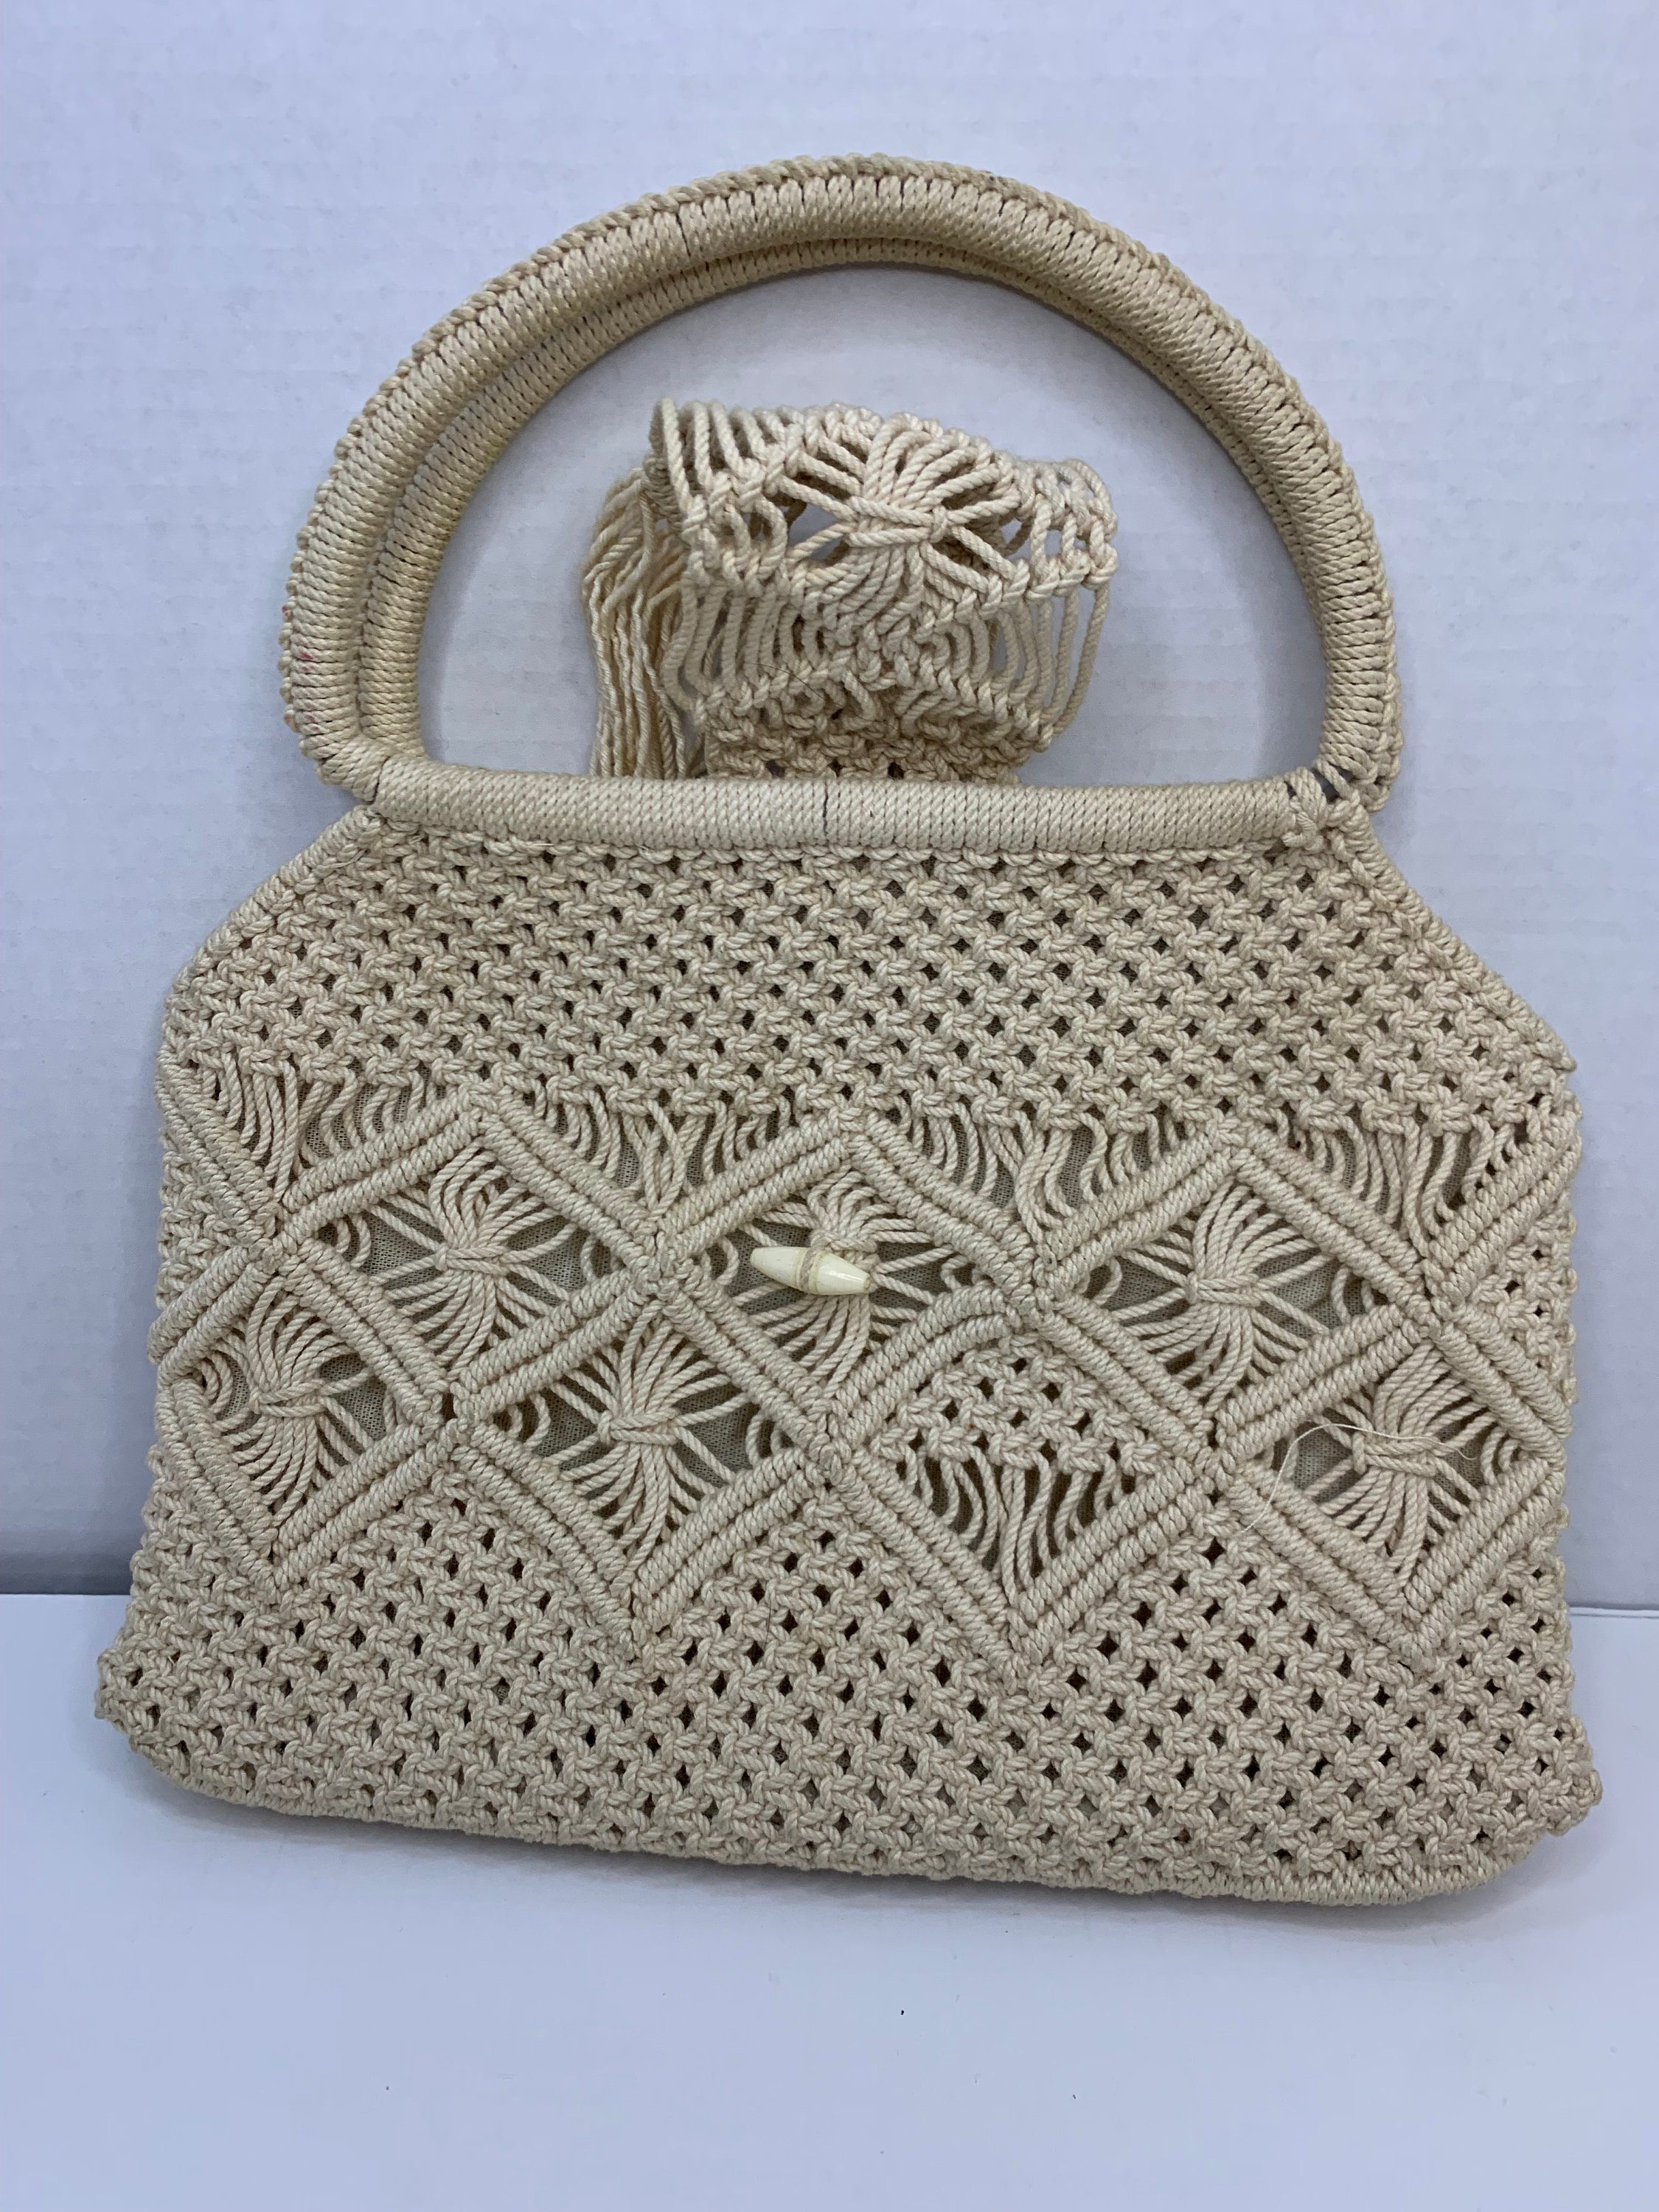 Make your own macrame purse - Gathered